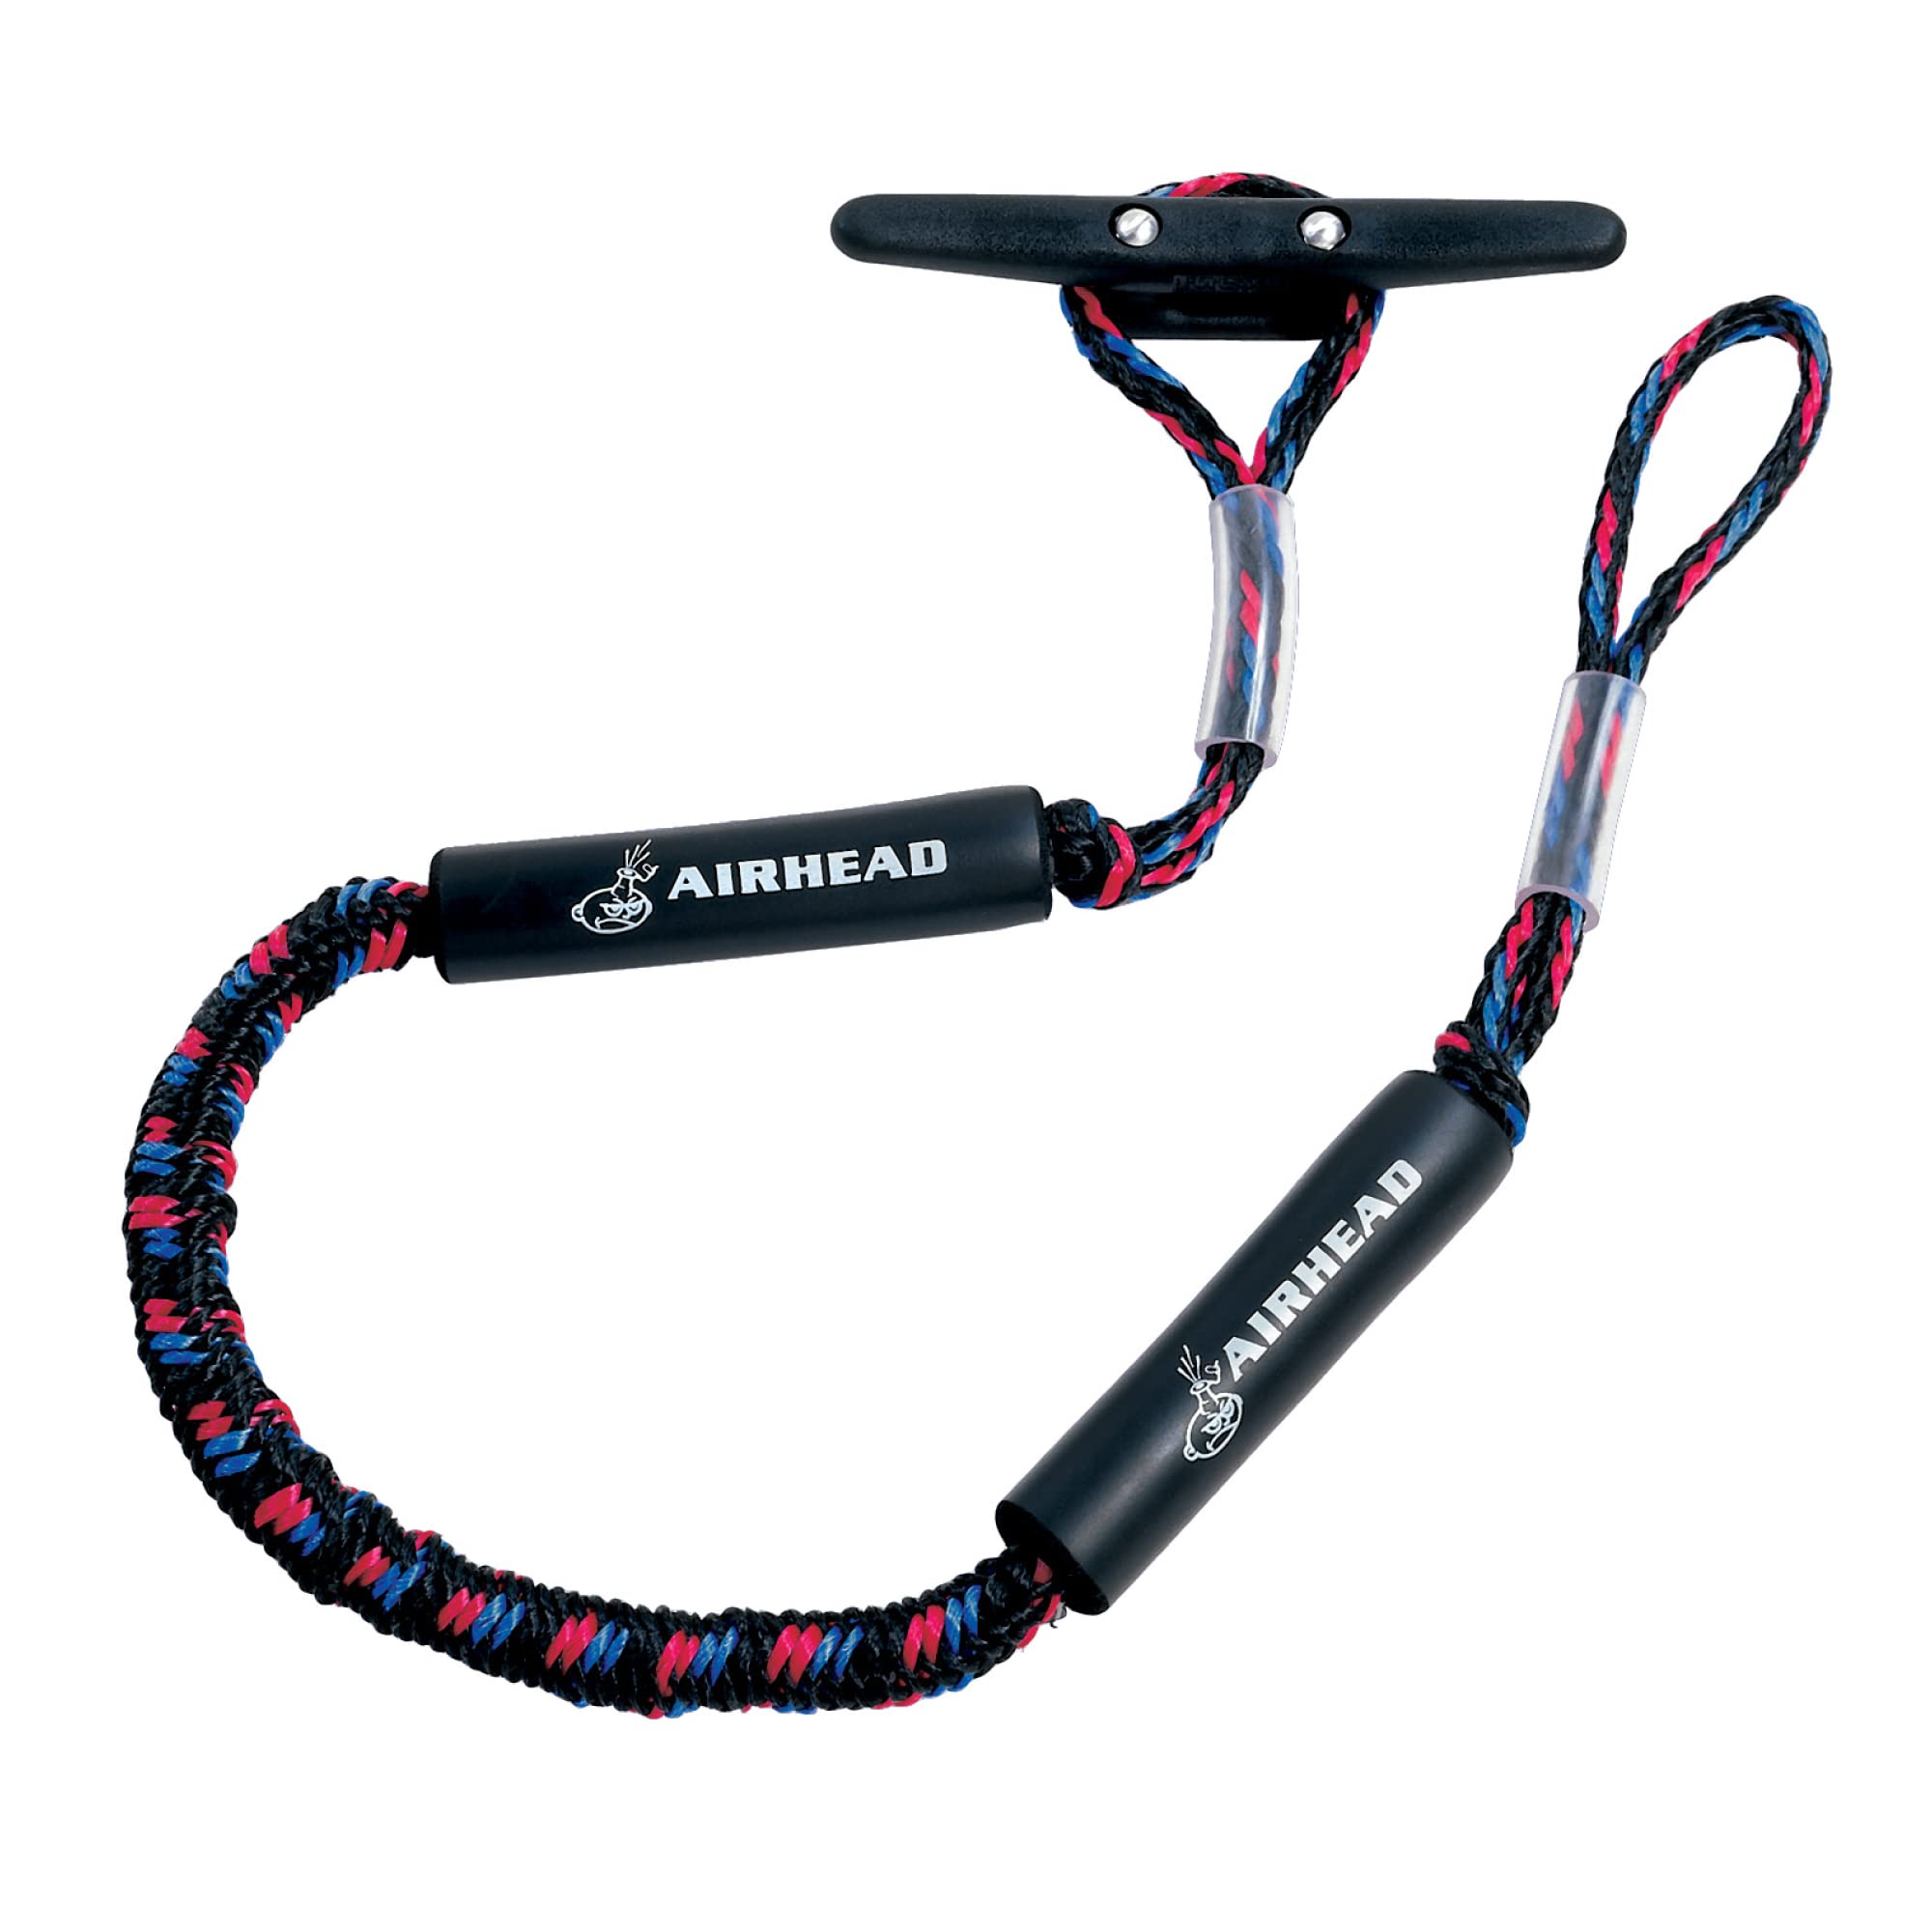 AIRHEAD AHDL-5 Bungee Dock LINE 5', 5-Feet, Black/blue/red